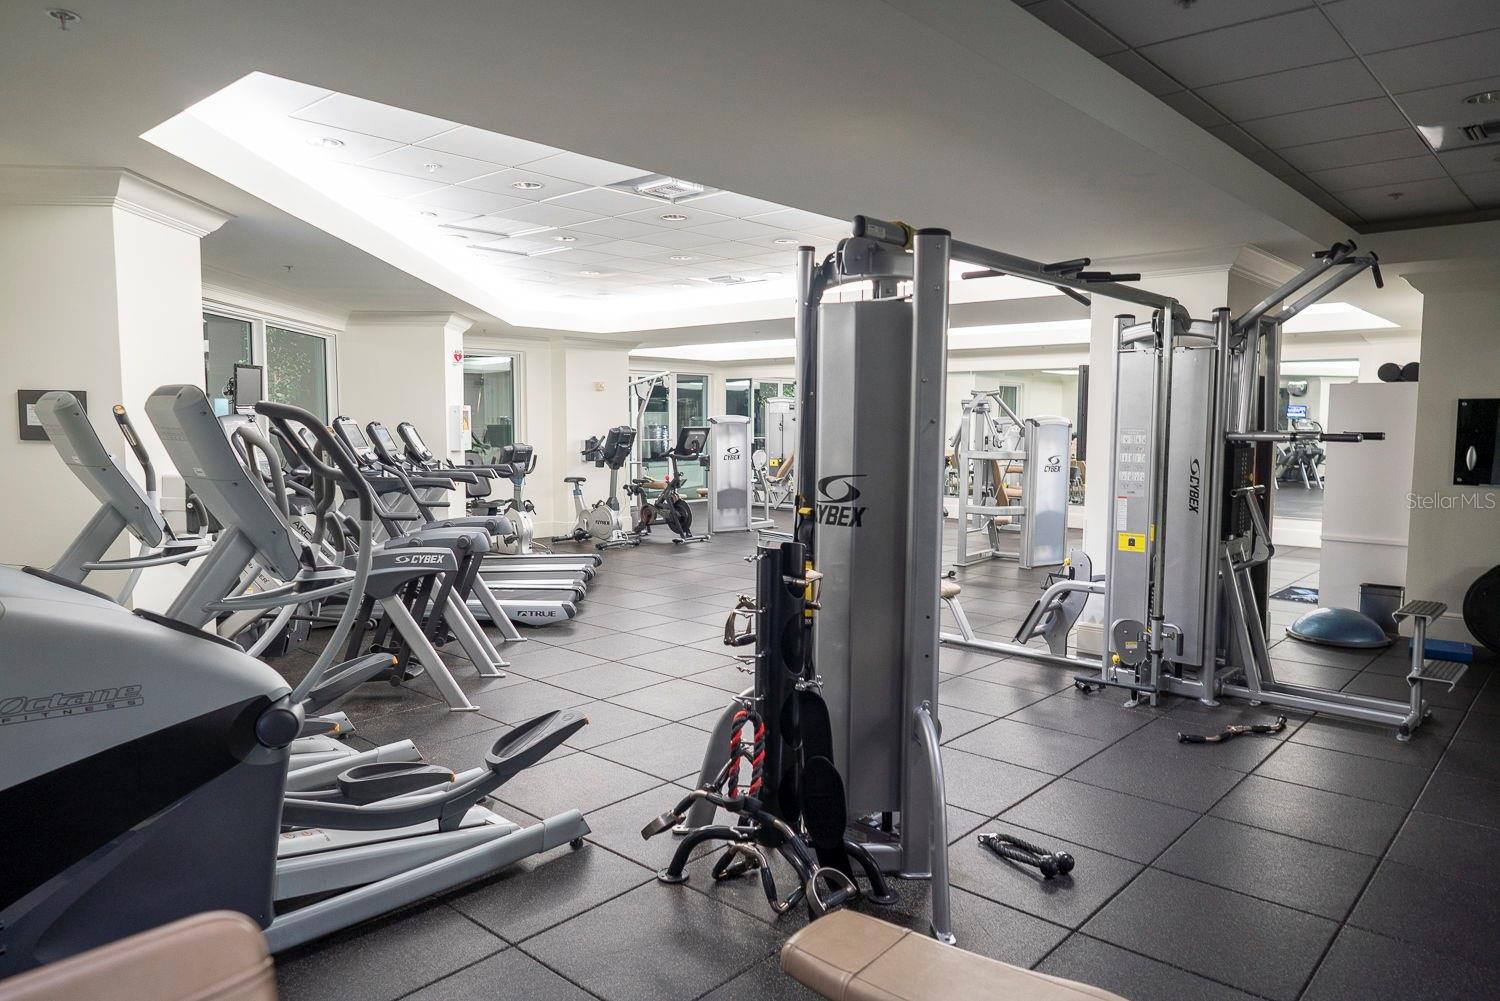 A glimpse at the state-of-the-art gym equipment made for various fitness routines.